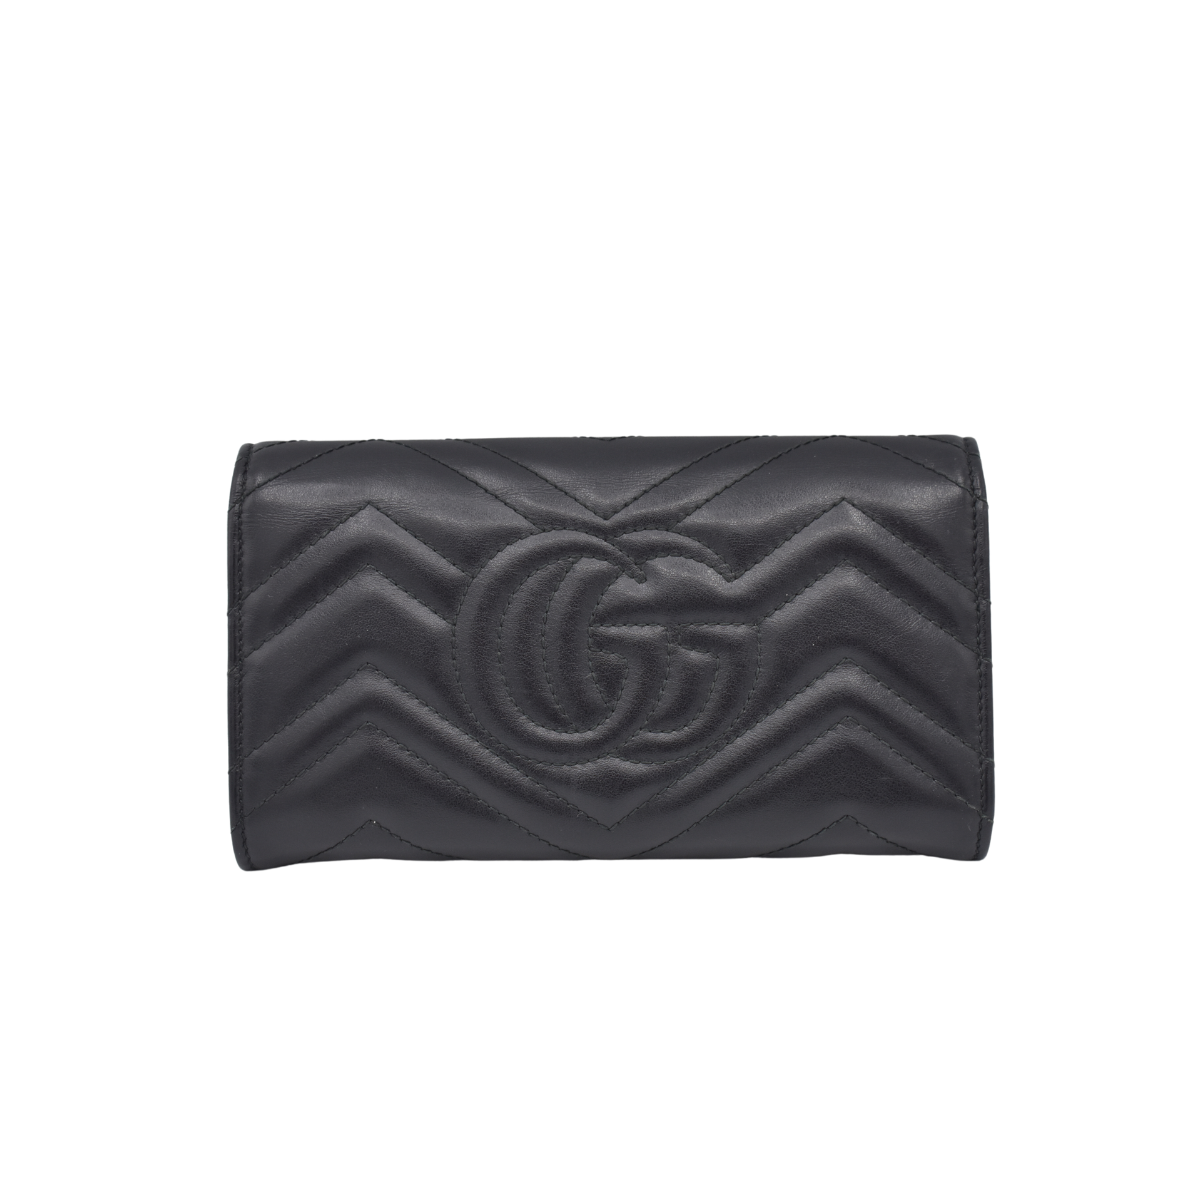 Ambiance Luxury Gucci Marmont Continental Wallet in Black